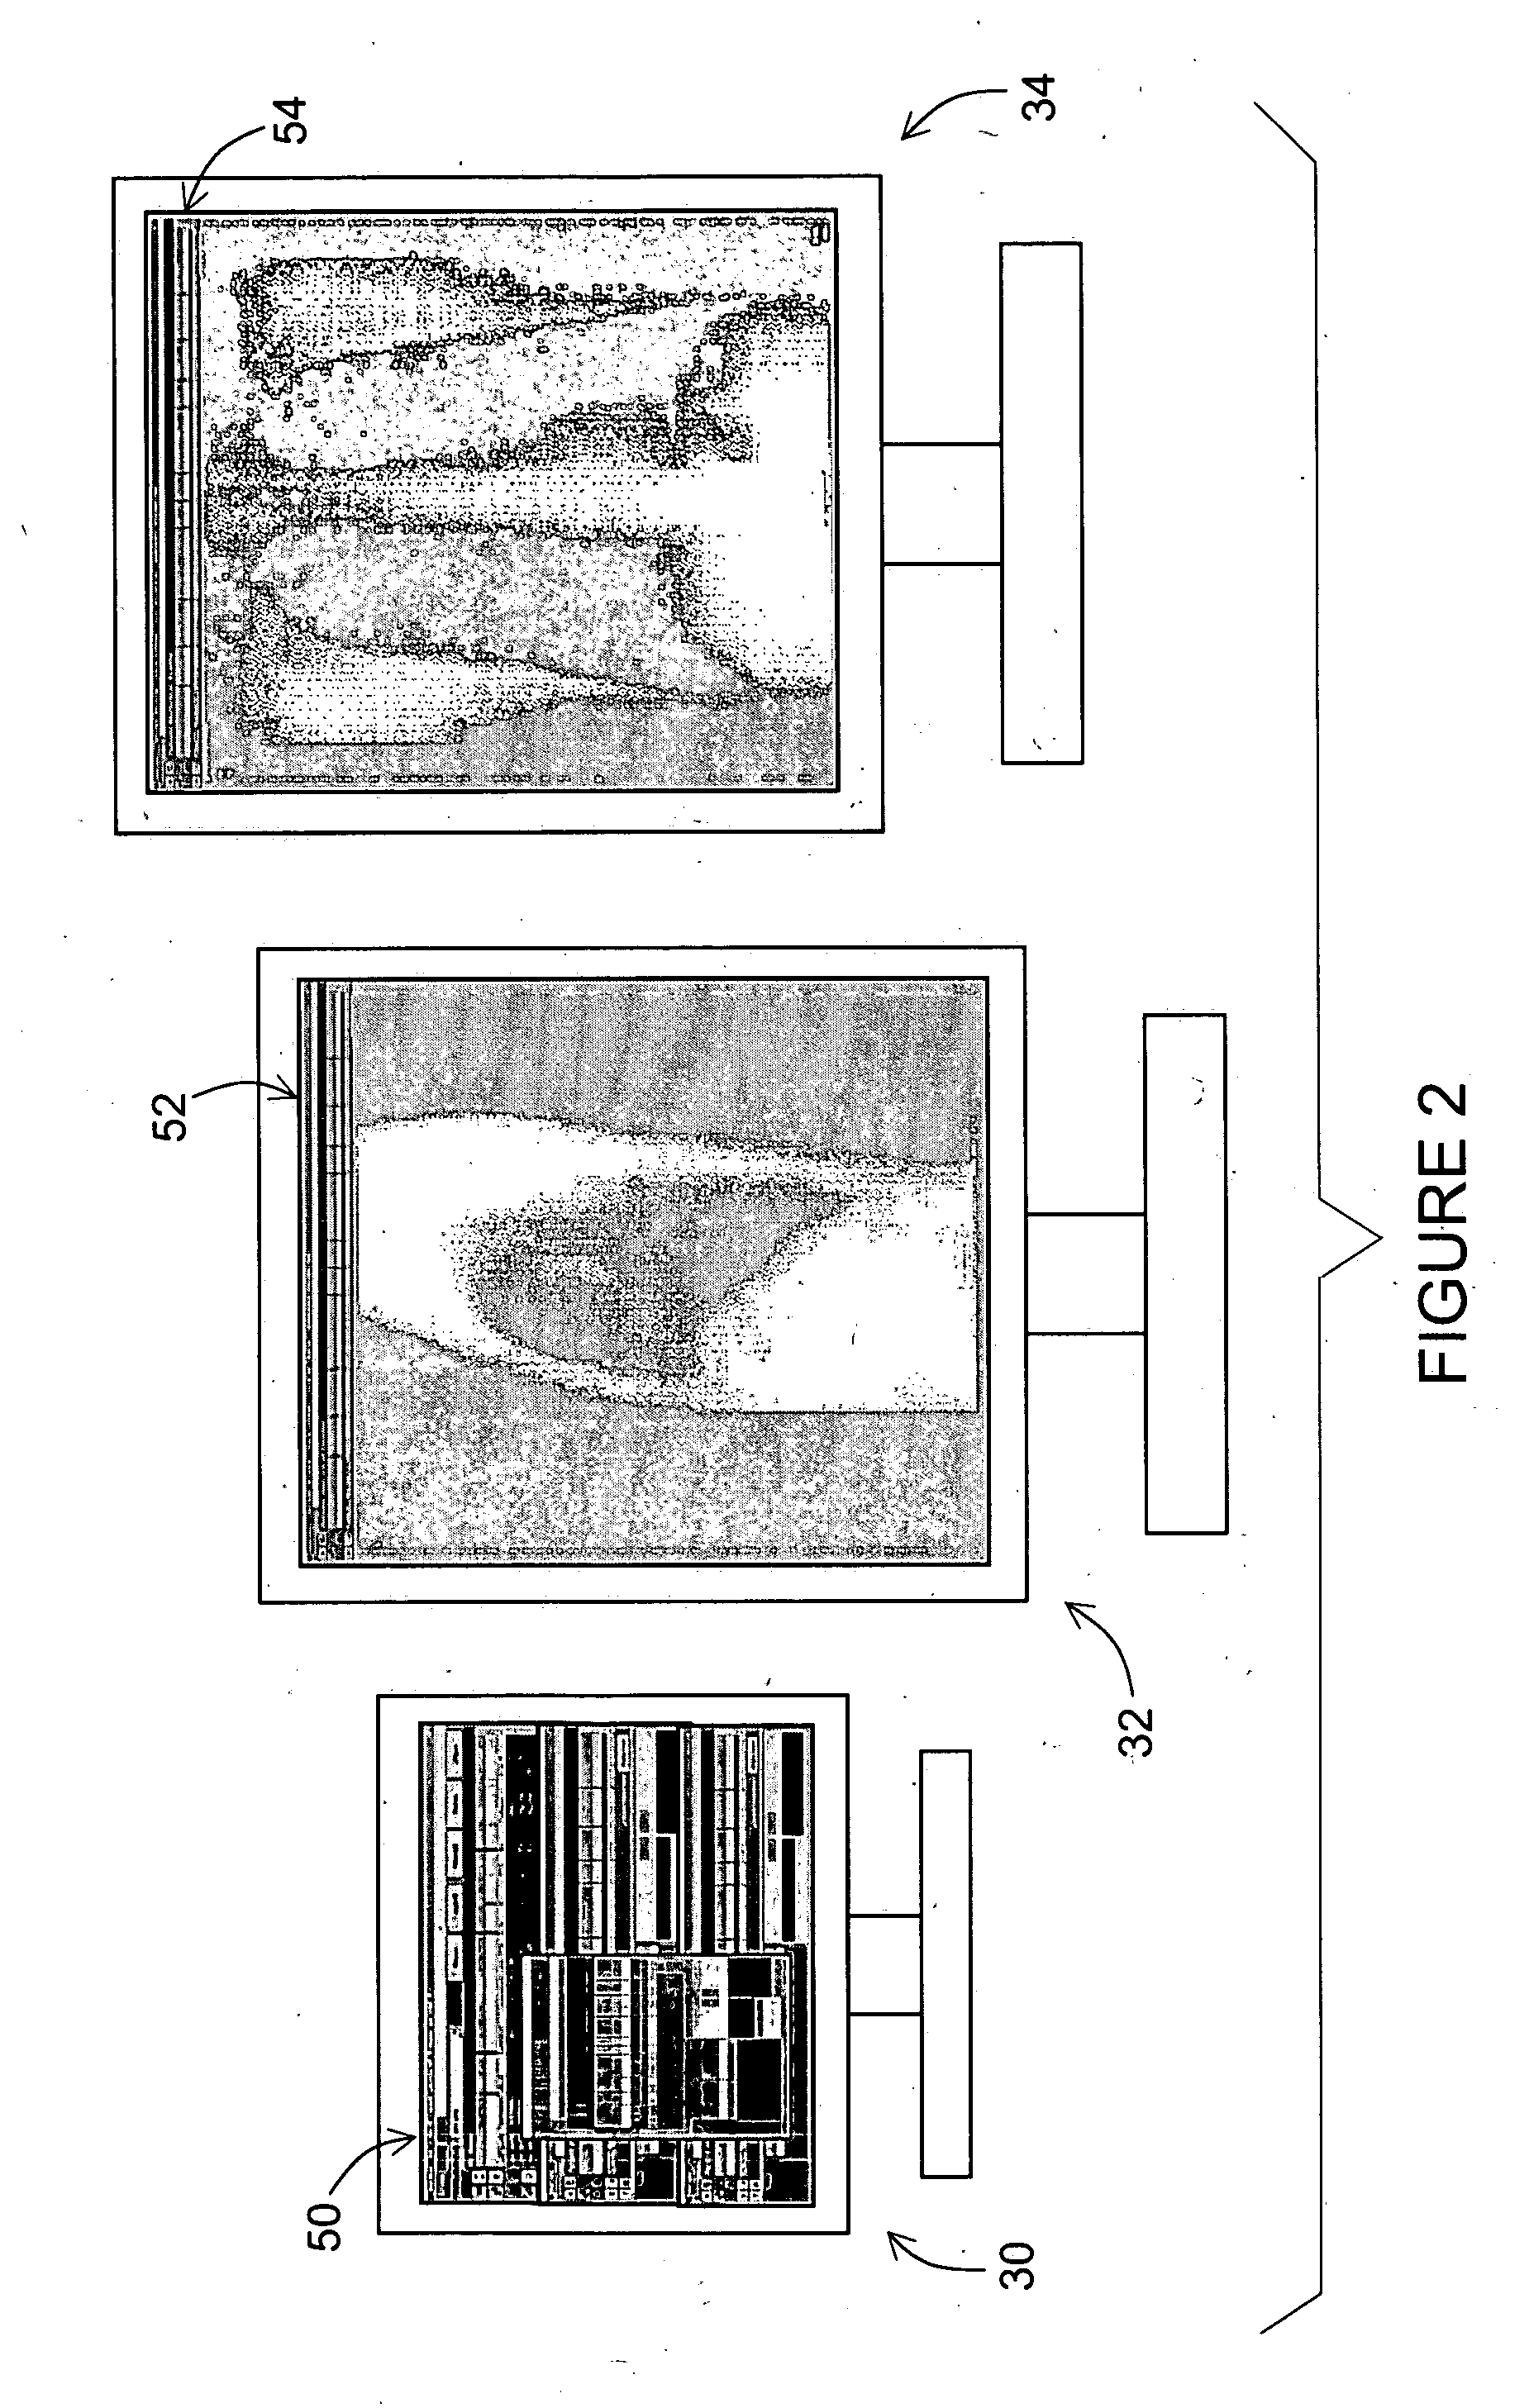 Methods and apparatus for displaying images on mixed monitor displays